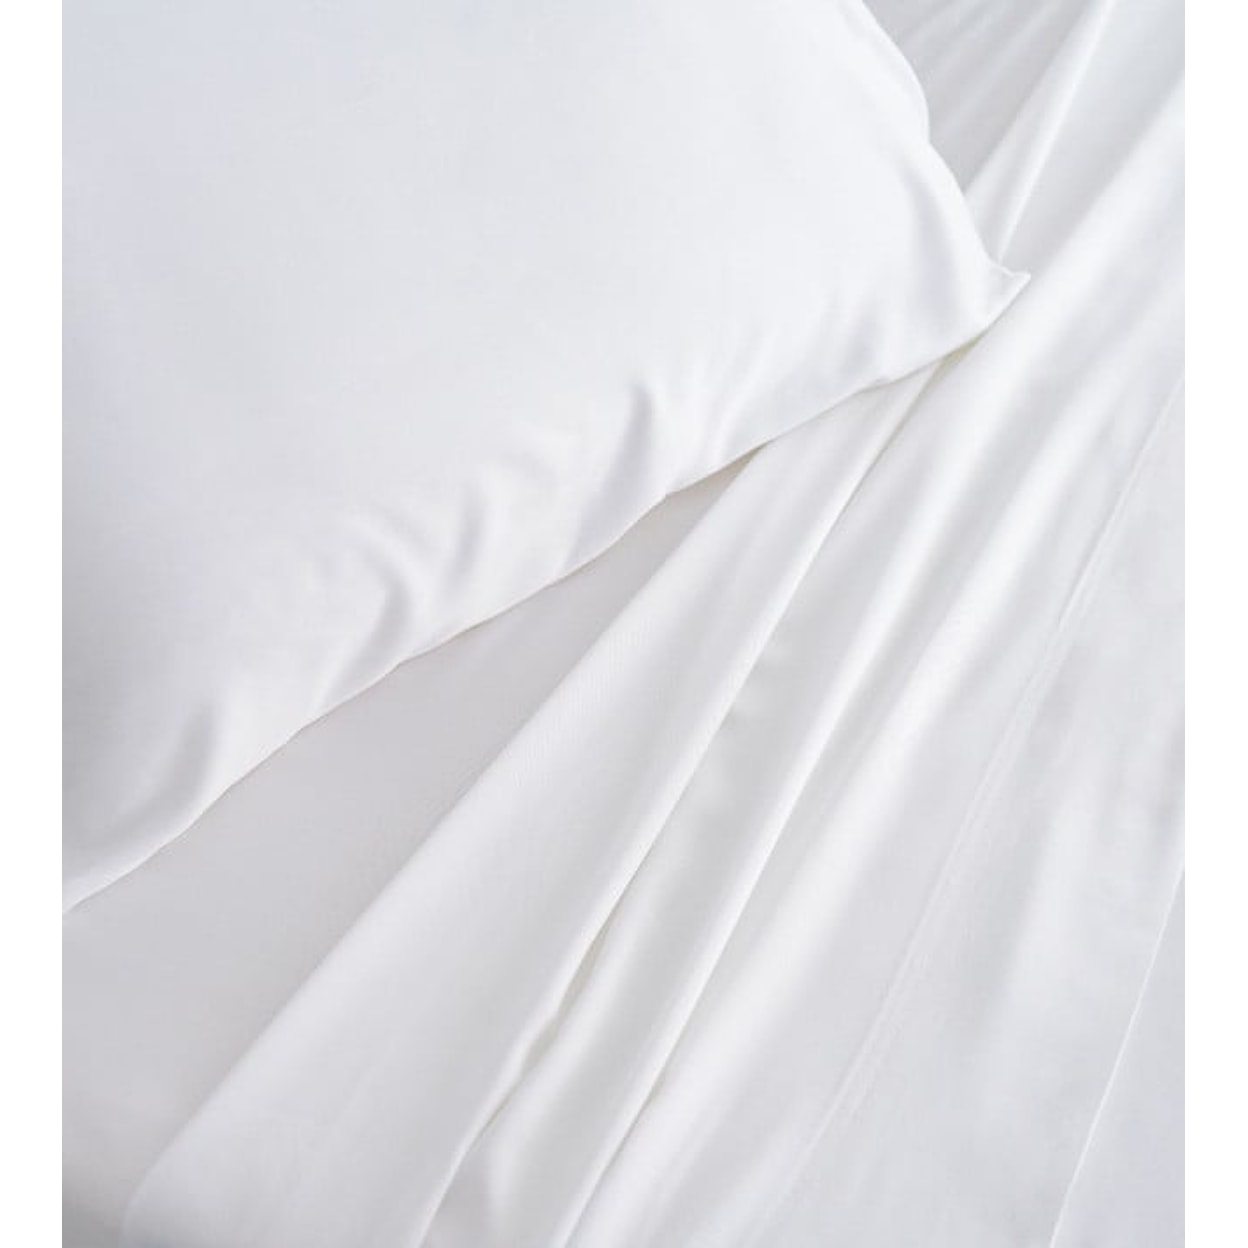 Cariloha Classic Bamboo Bed Sheet Set Standard Set of Pillowcases in White